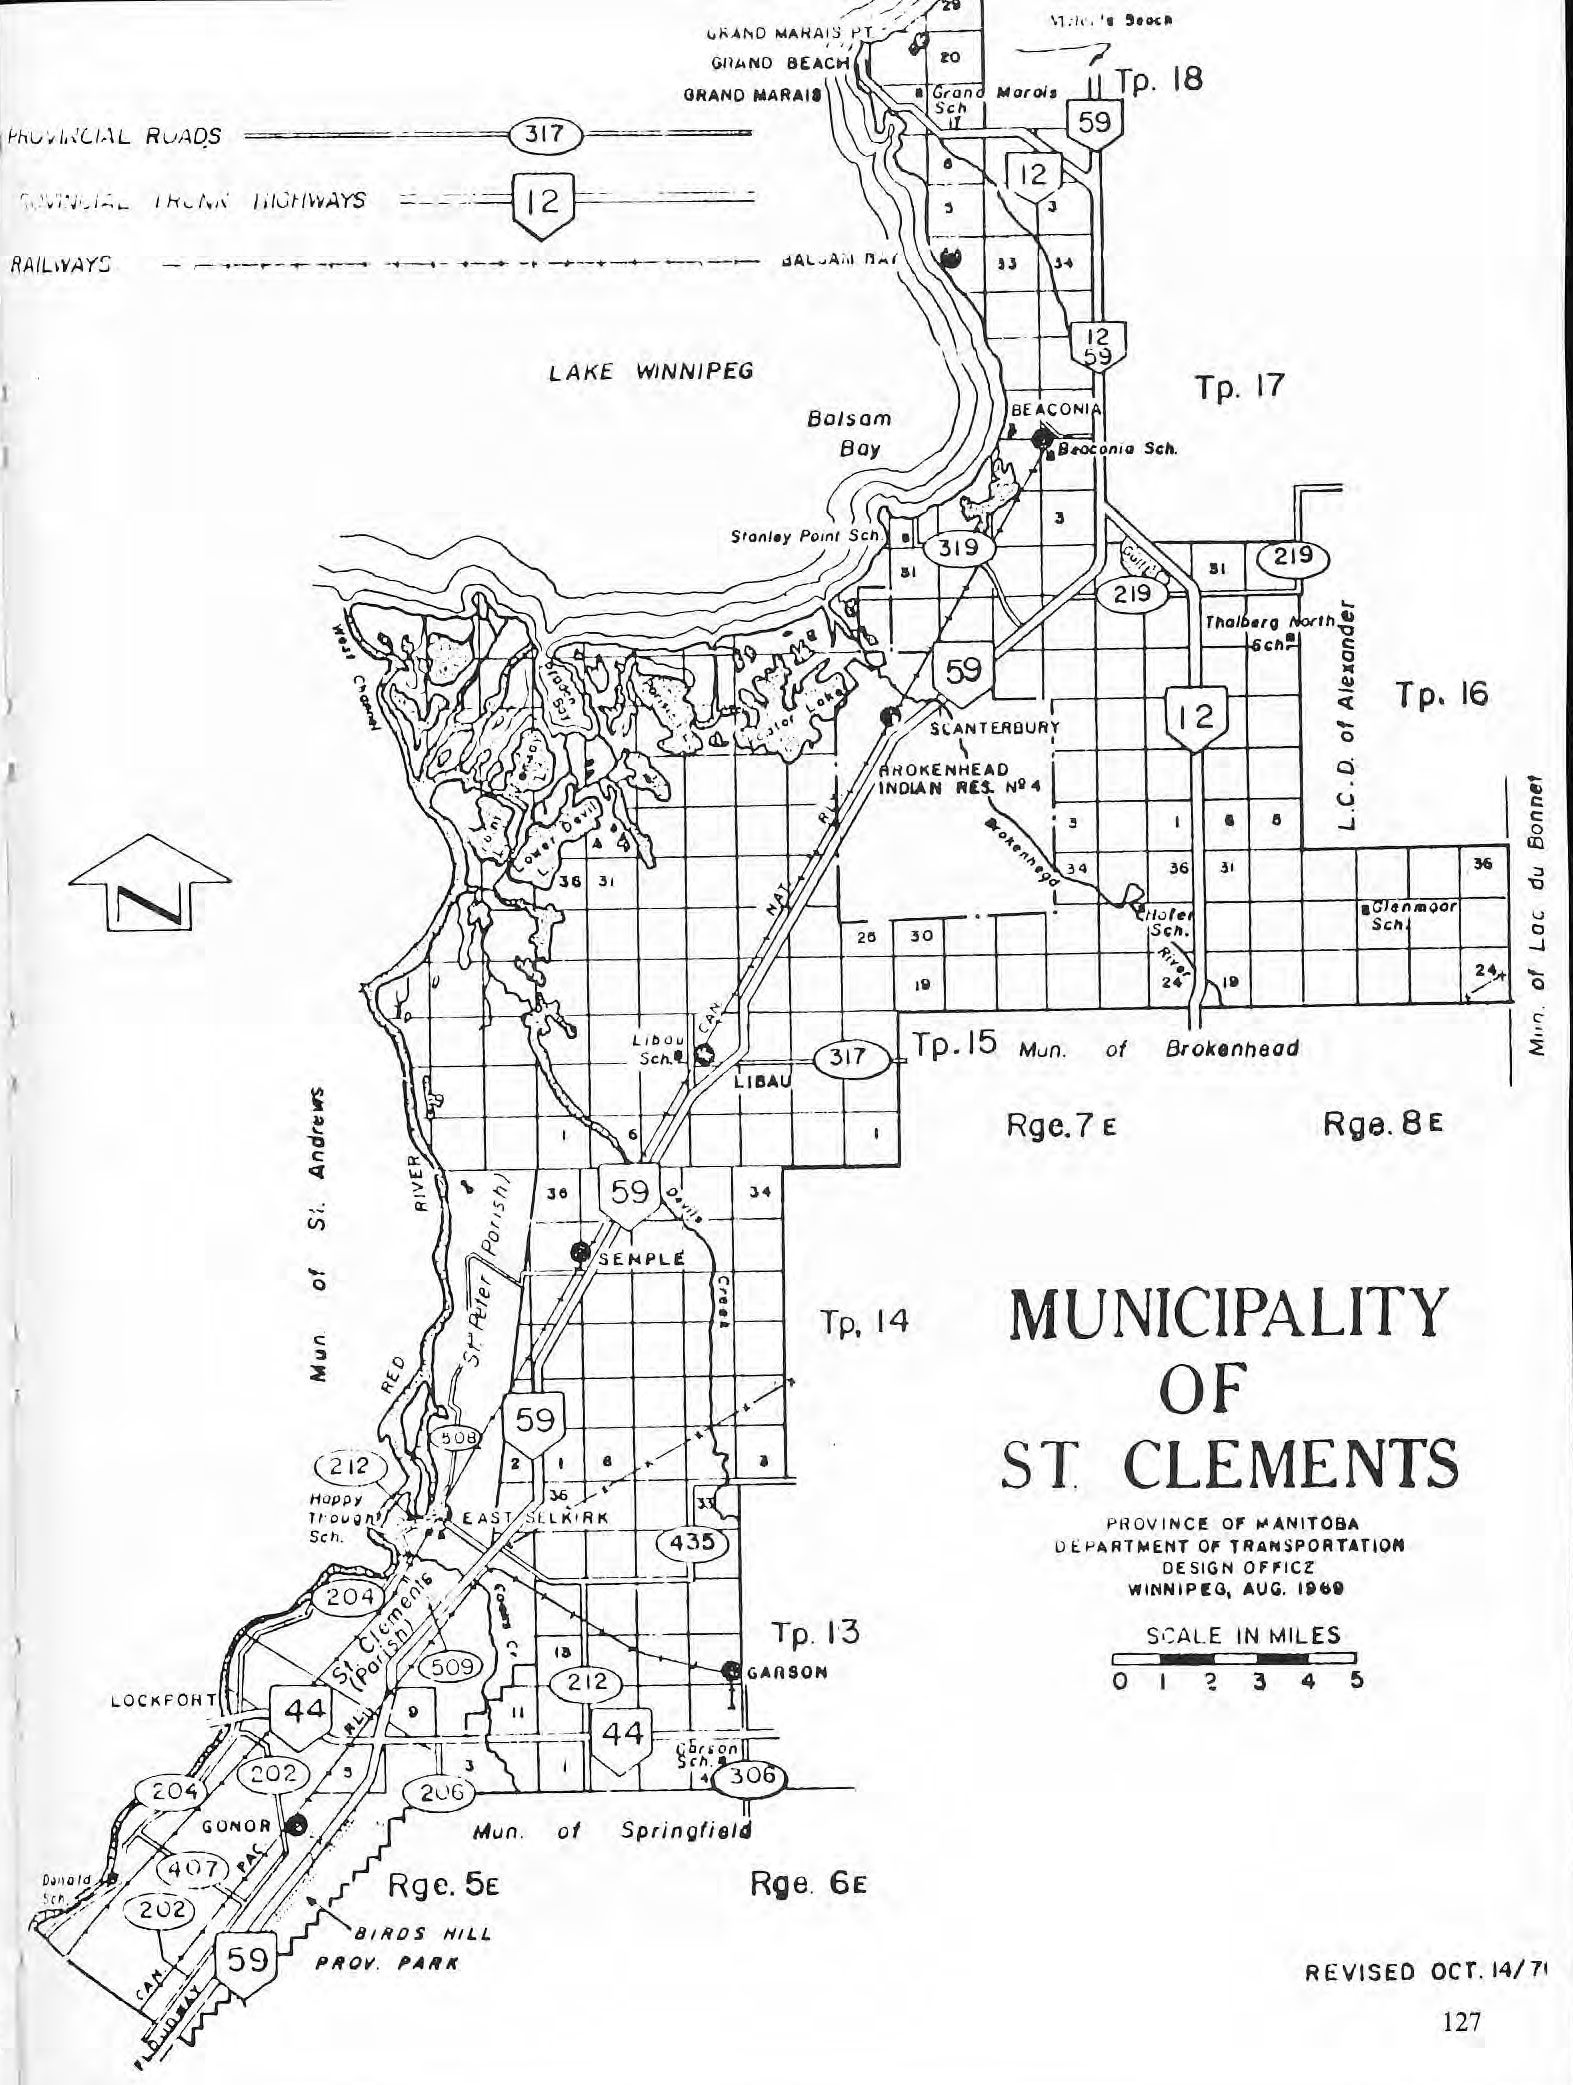 Map of St. Clements